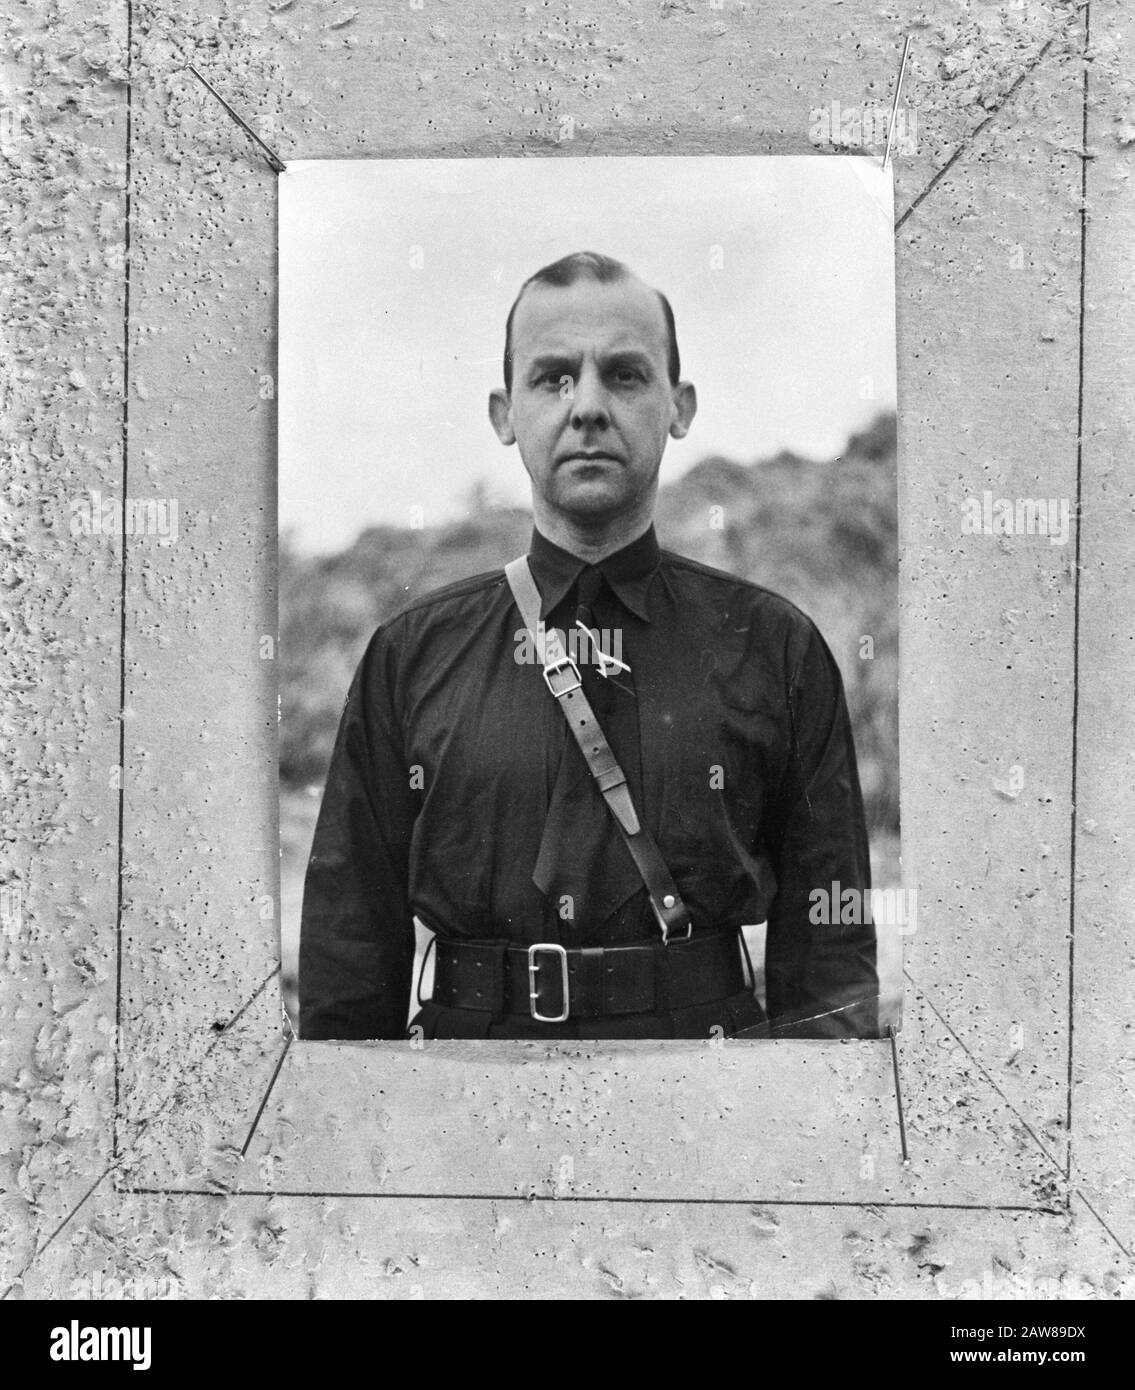 M.M. Rost van Tonningen (1894-1945). NSB header and in the war including President of the Nederlandsche Bank Annotation: Repro Negative Date: June 13, 1967 Keywords: National Socialist Movement, World War II, political parties, political movements, portraits Person Name: Rost of Tonningen, Meinoud Stock Photo